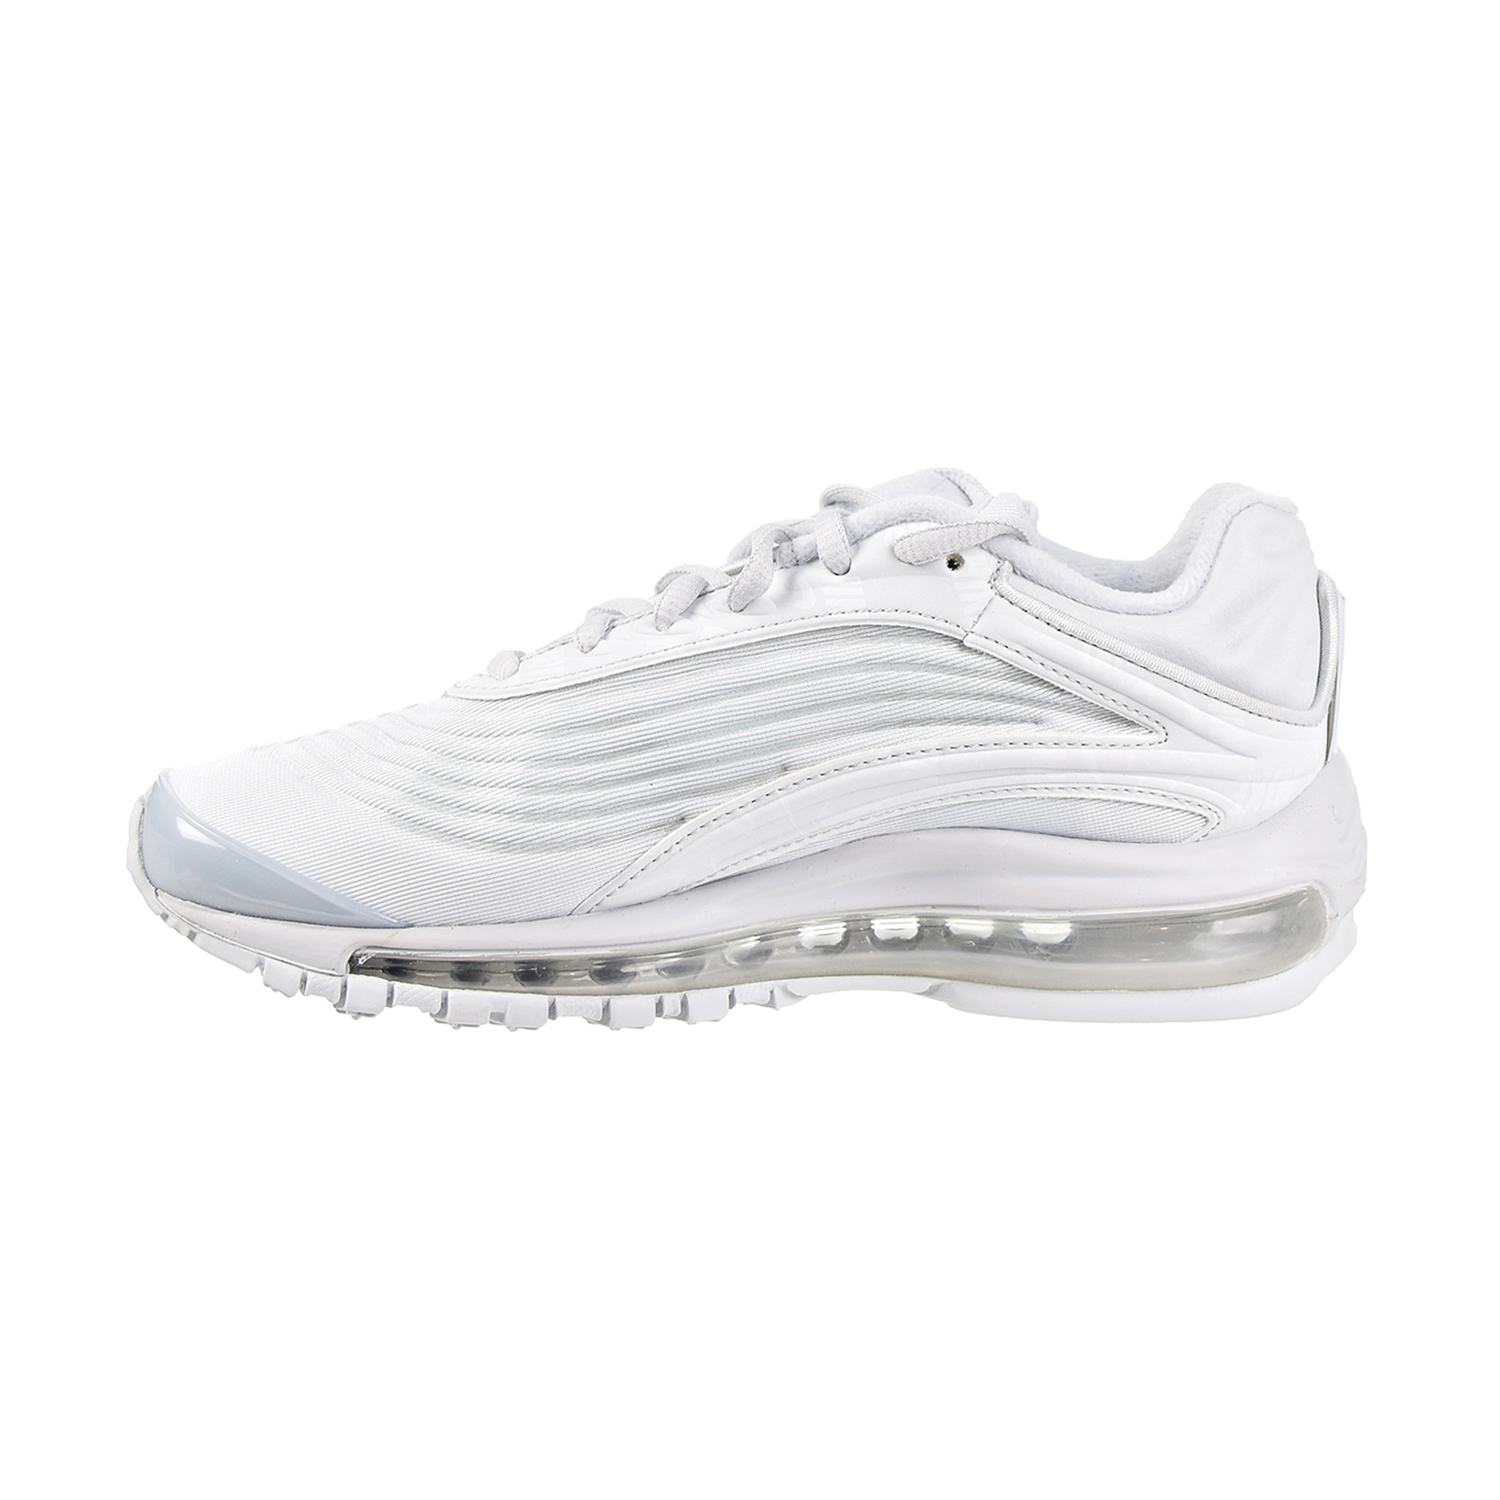 Nike Air Max Deluxe SE Women's Shoes Pure Platinum at8692-002 - image 4 of 6